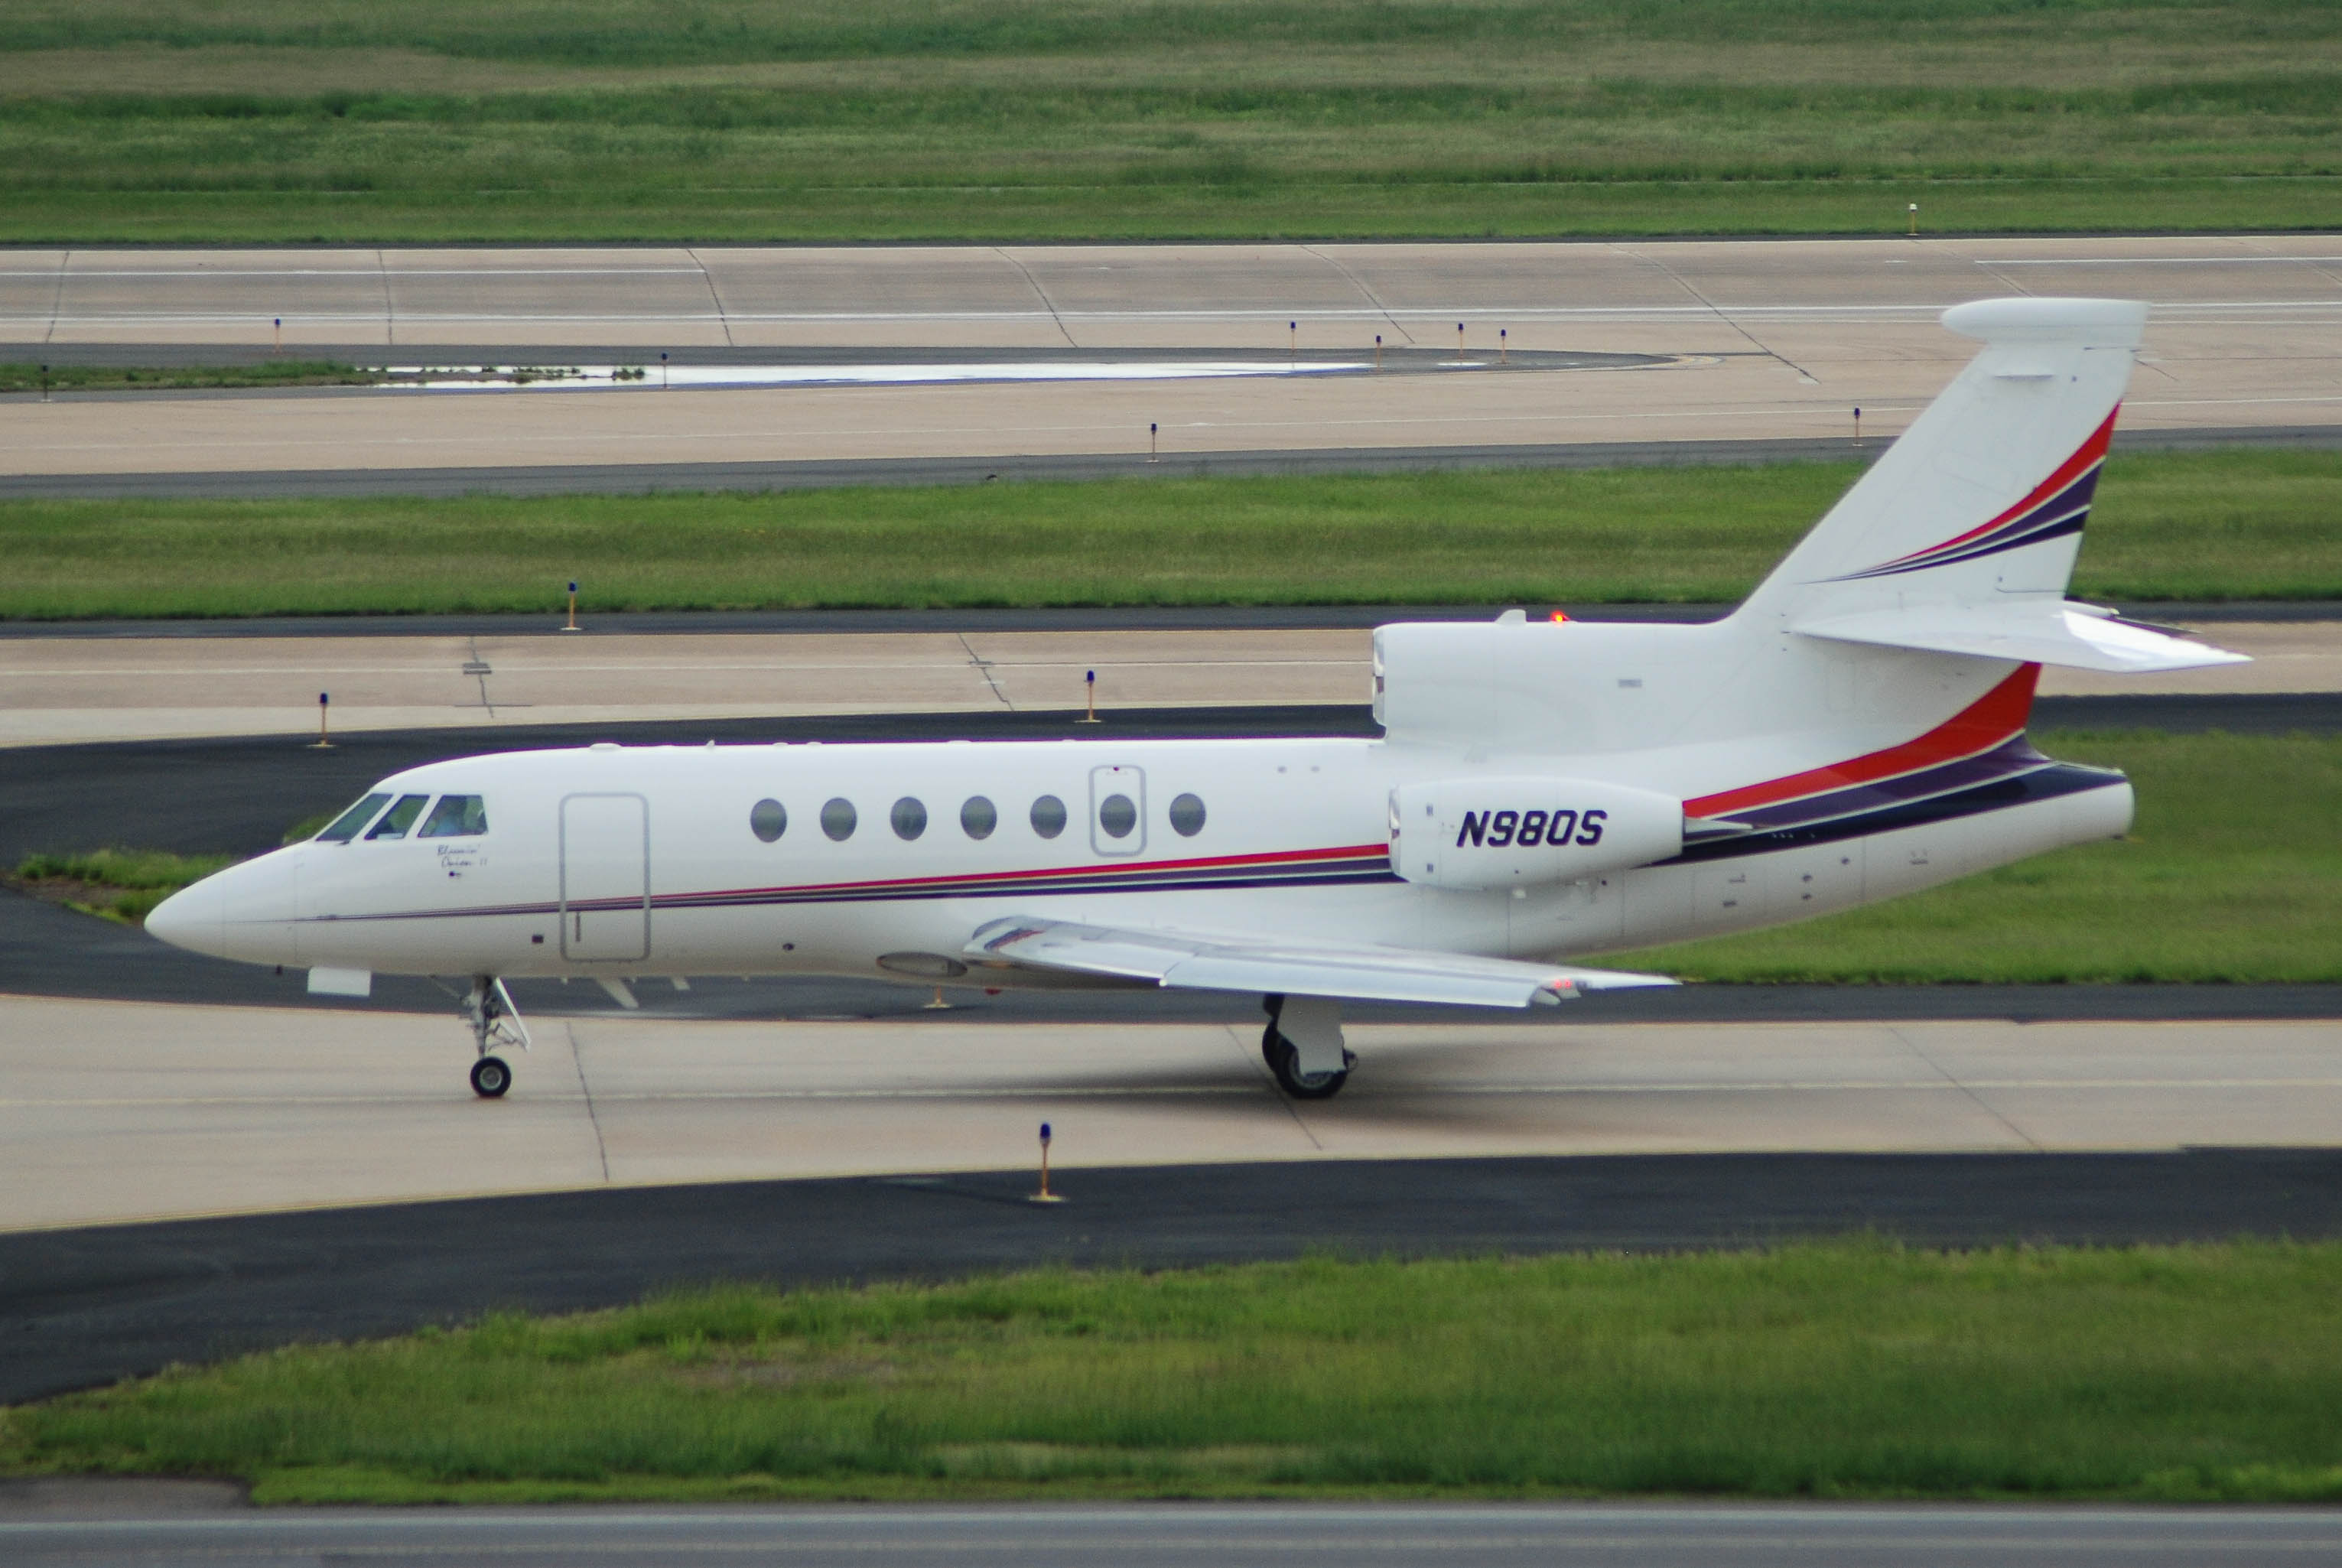 N980S/N980S Corporate Dassault Falcon 50 Airframe Information - AVSpotters.com